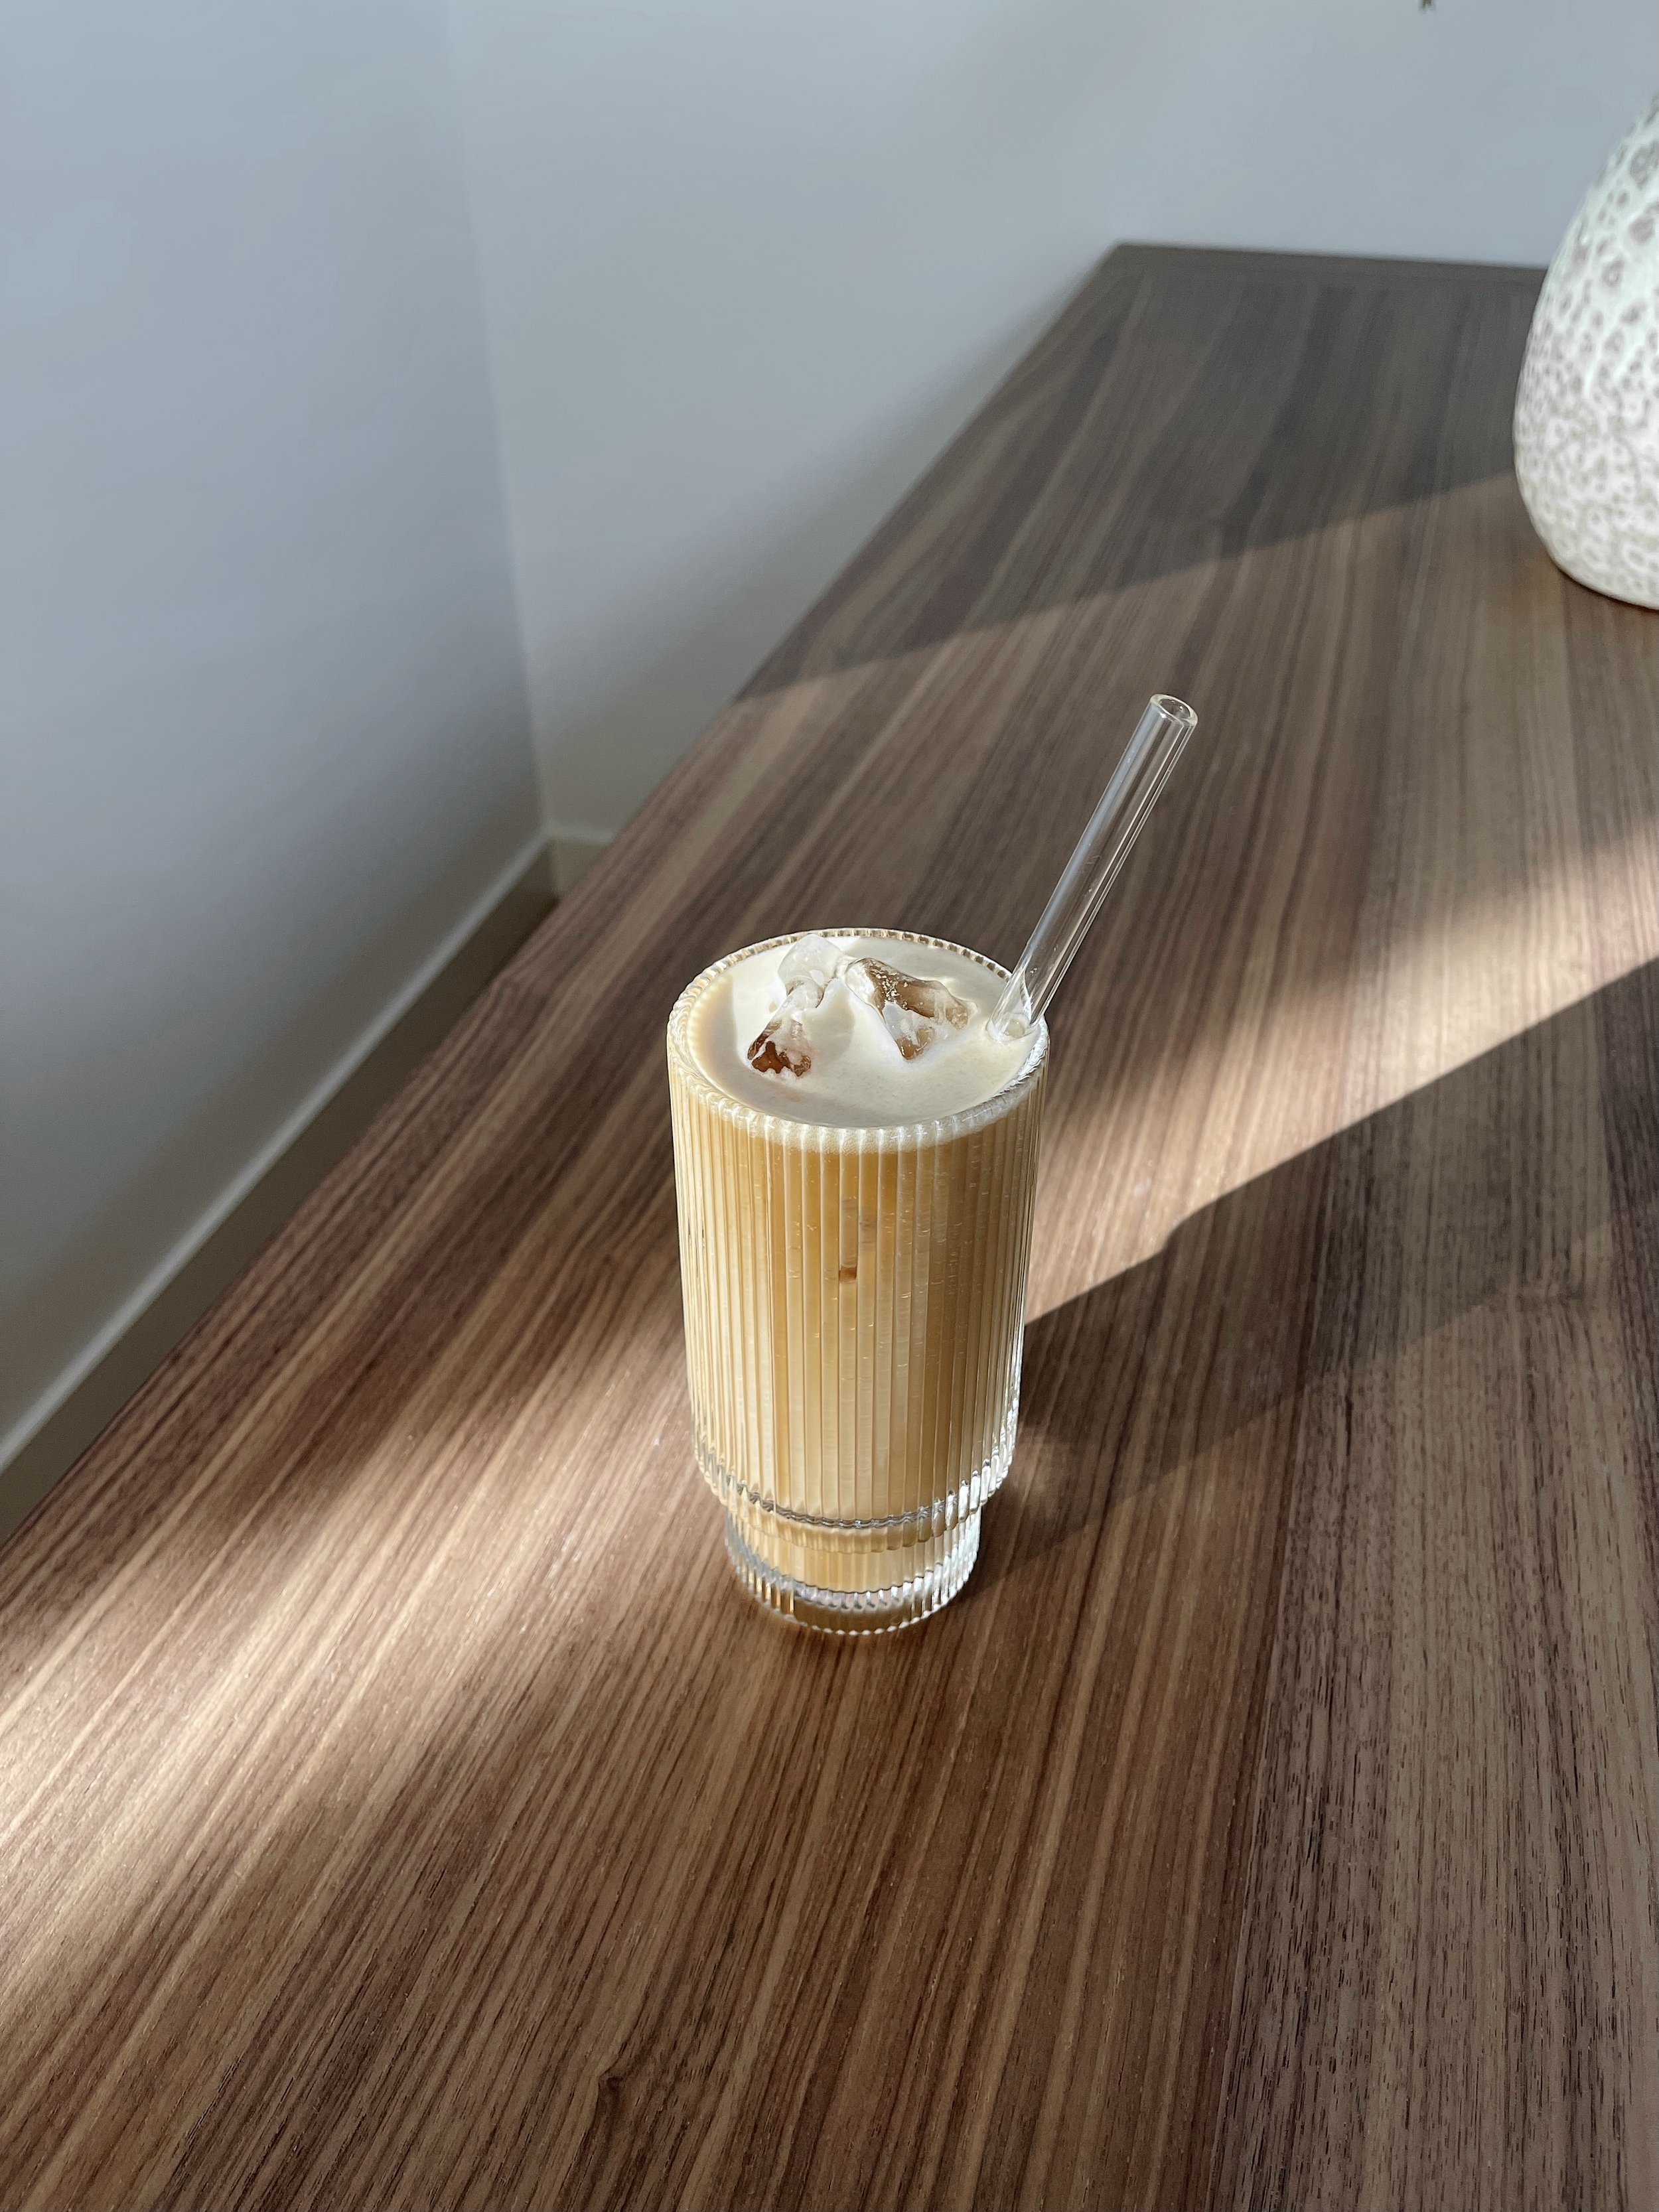 Iced Coffee At Home - Amazon Ribbed Glass - Bre Sheppard's Faves.jpg